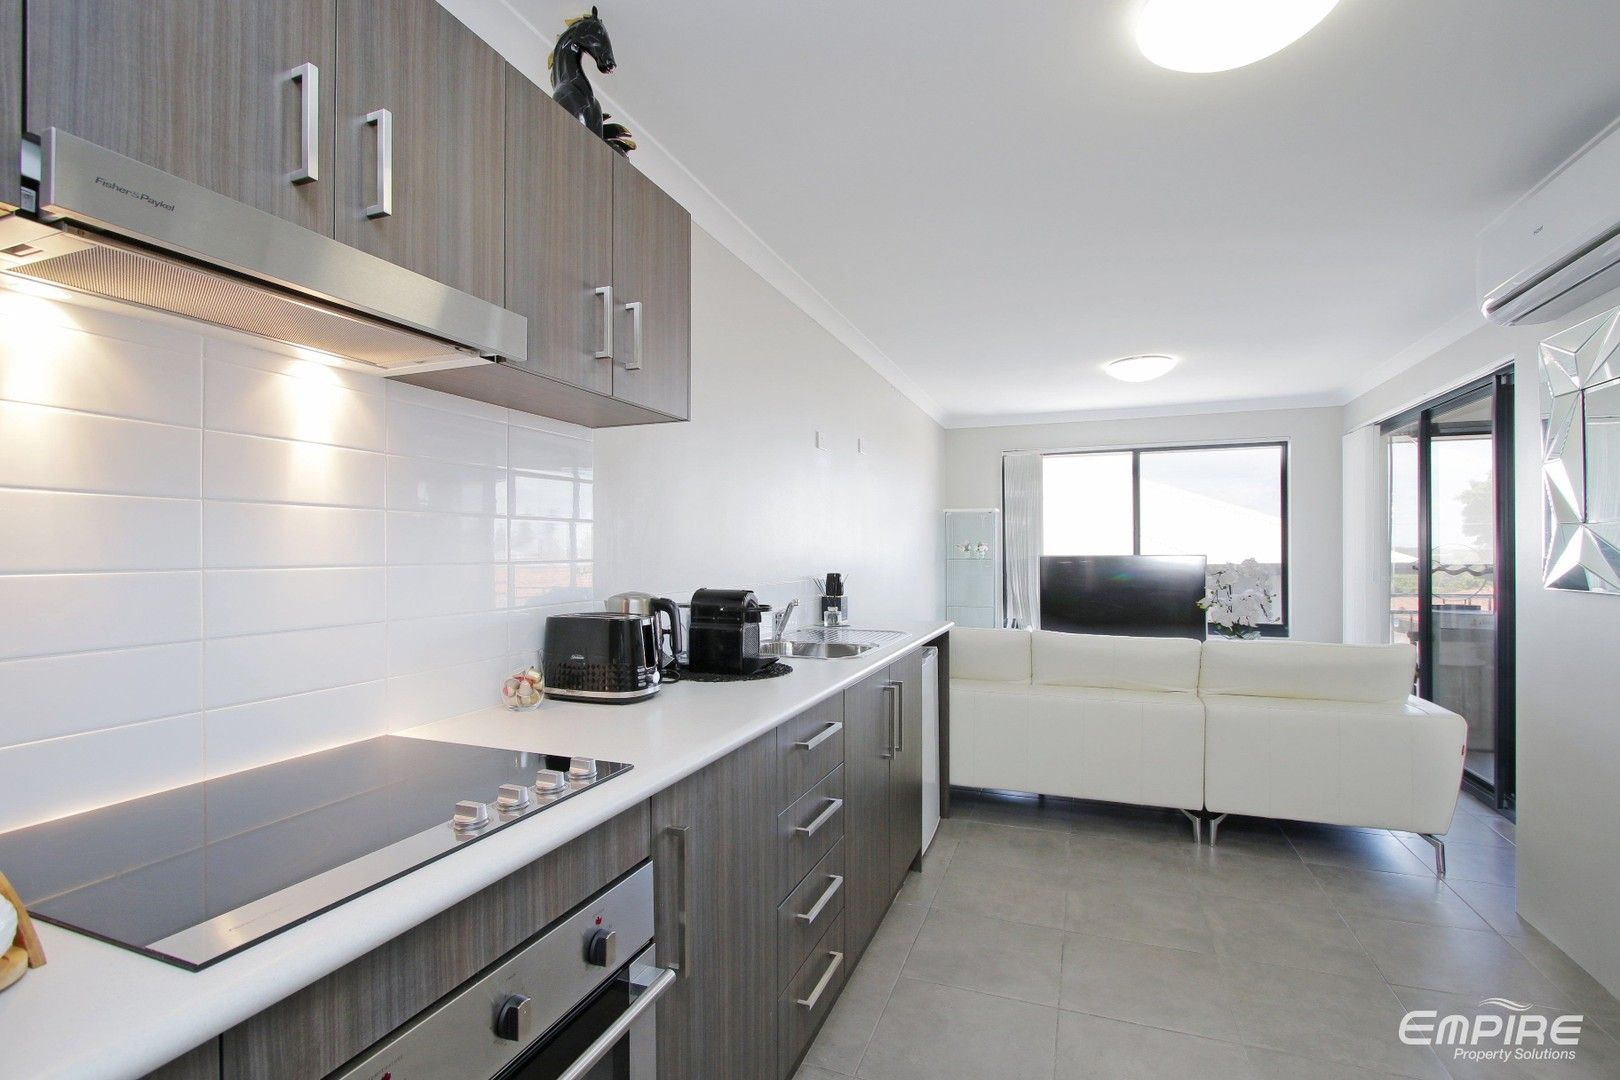 2 bedrooms Apartment / Unit / Flat in 5/22 Edeline Street SPEARWOOD WA, 6163